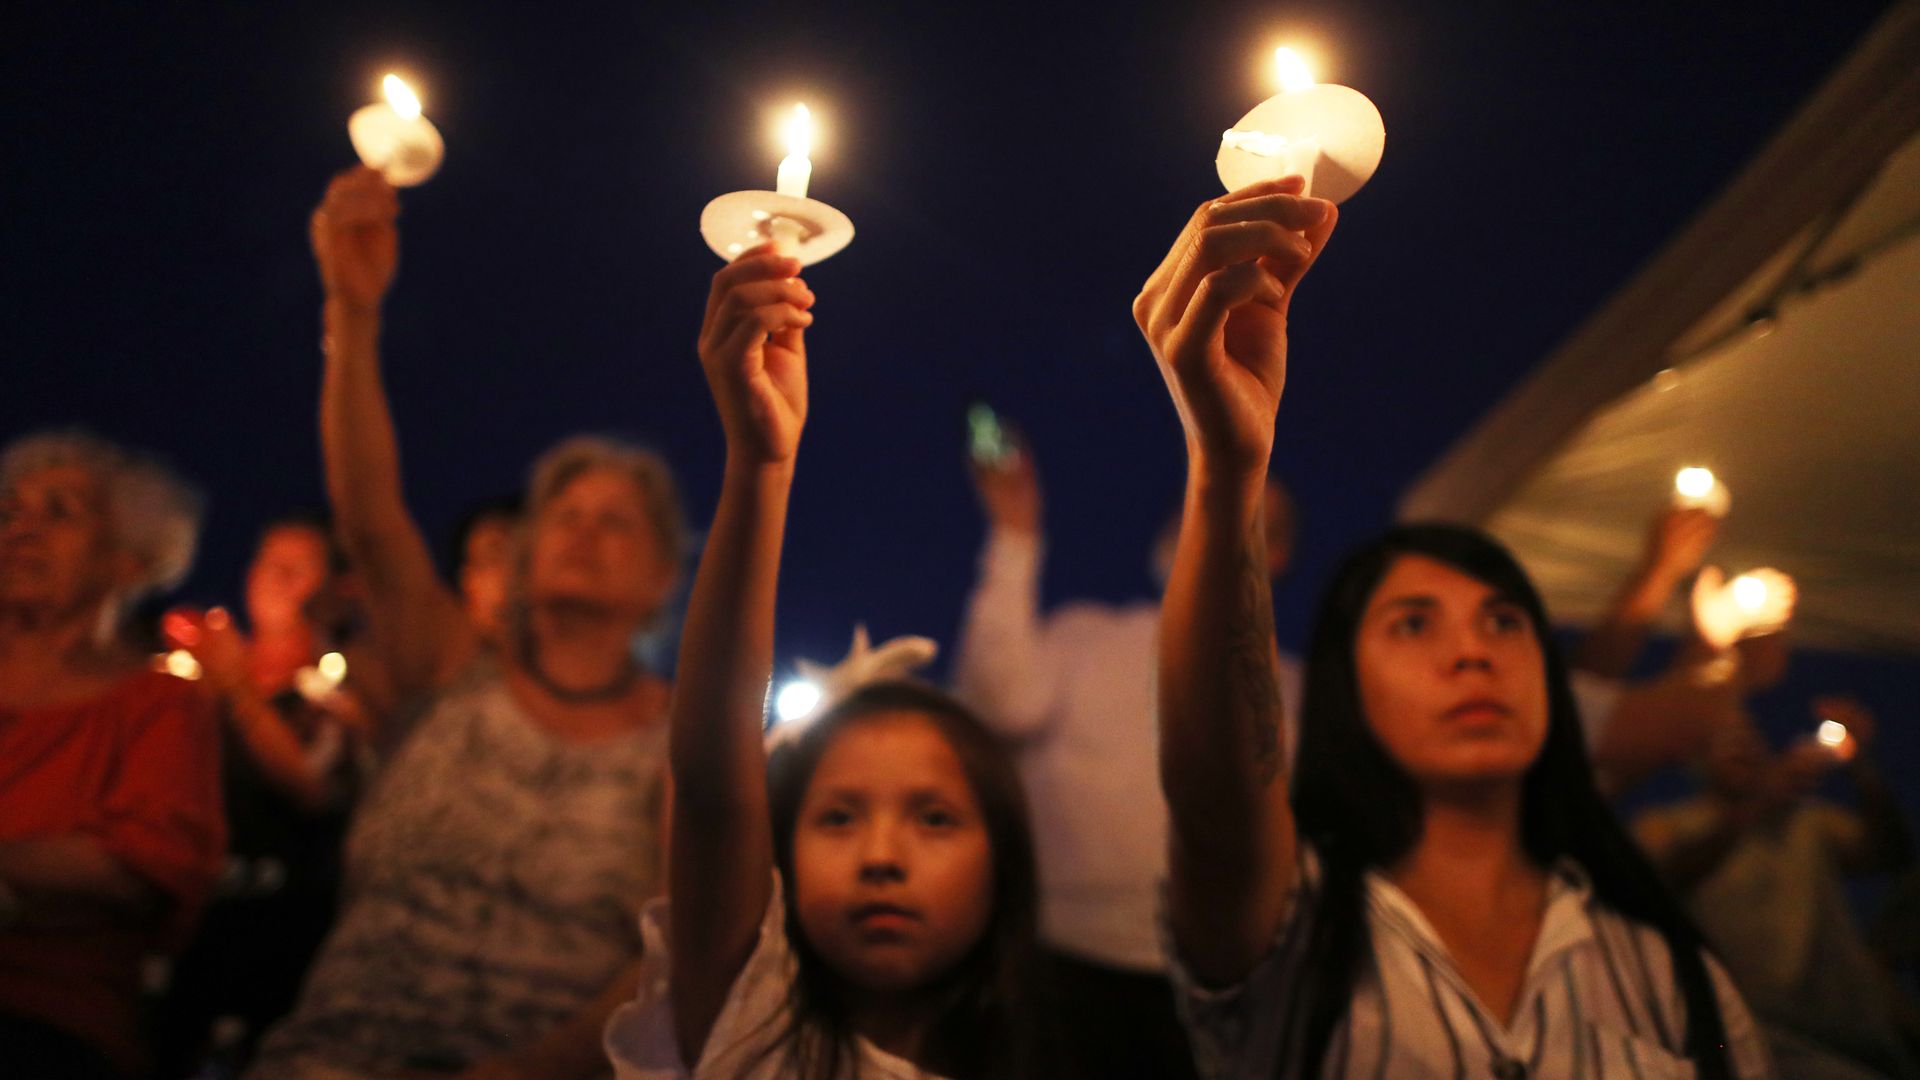 Mourners holding up candles at a vigil for those lost in El Paso.